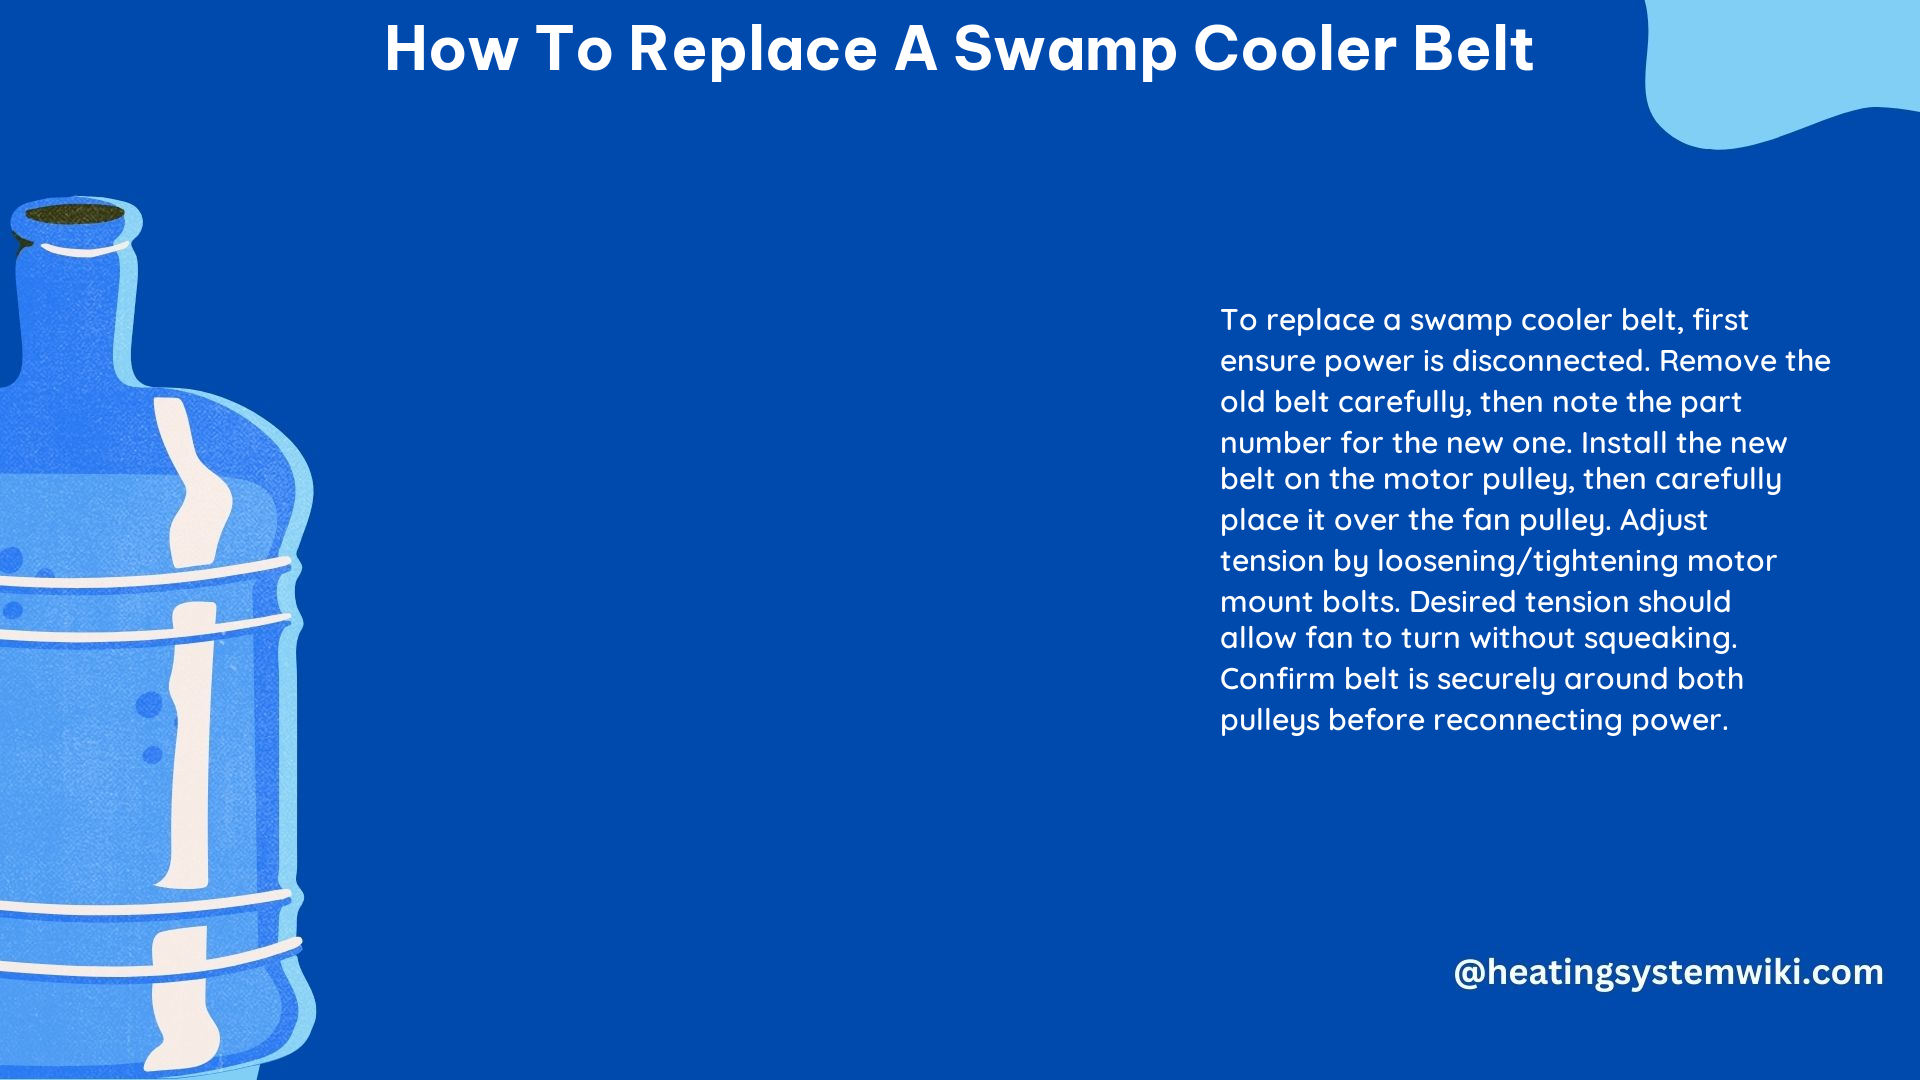 How to Replace a Swamp Cooler Belt